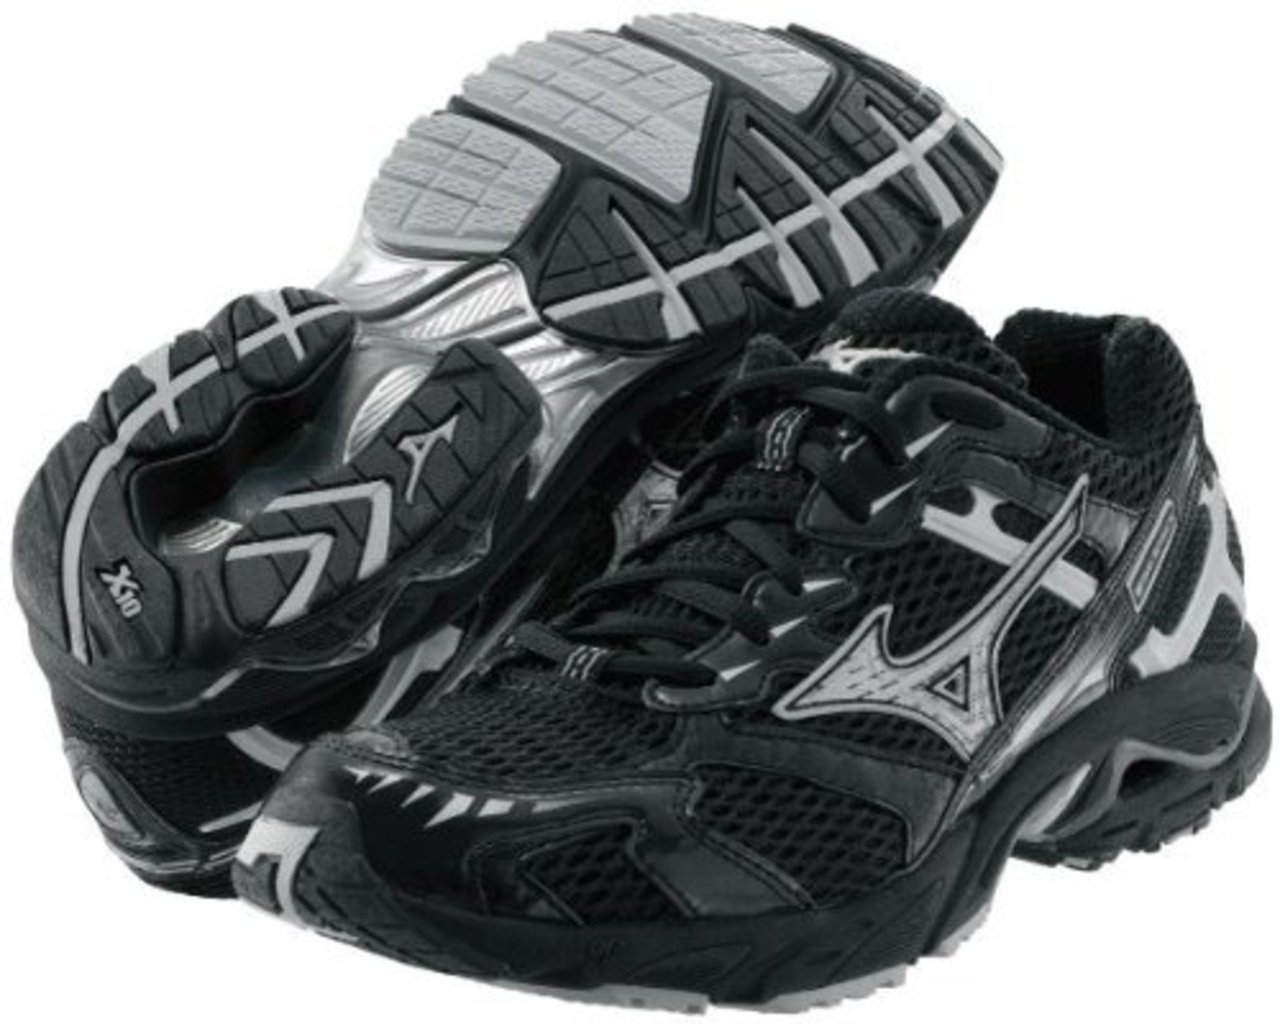 mizuno volleyball shoes price list in philippines